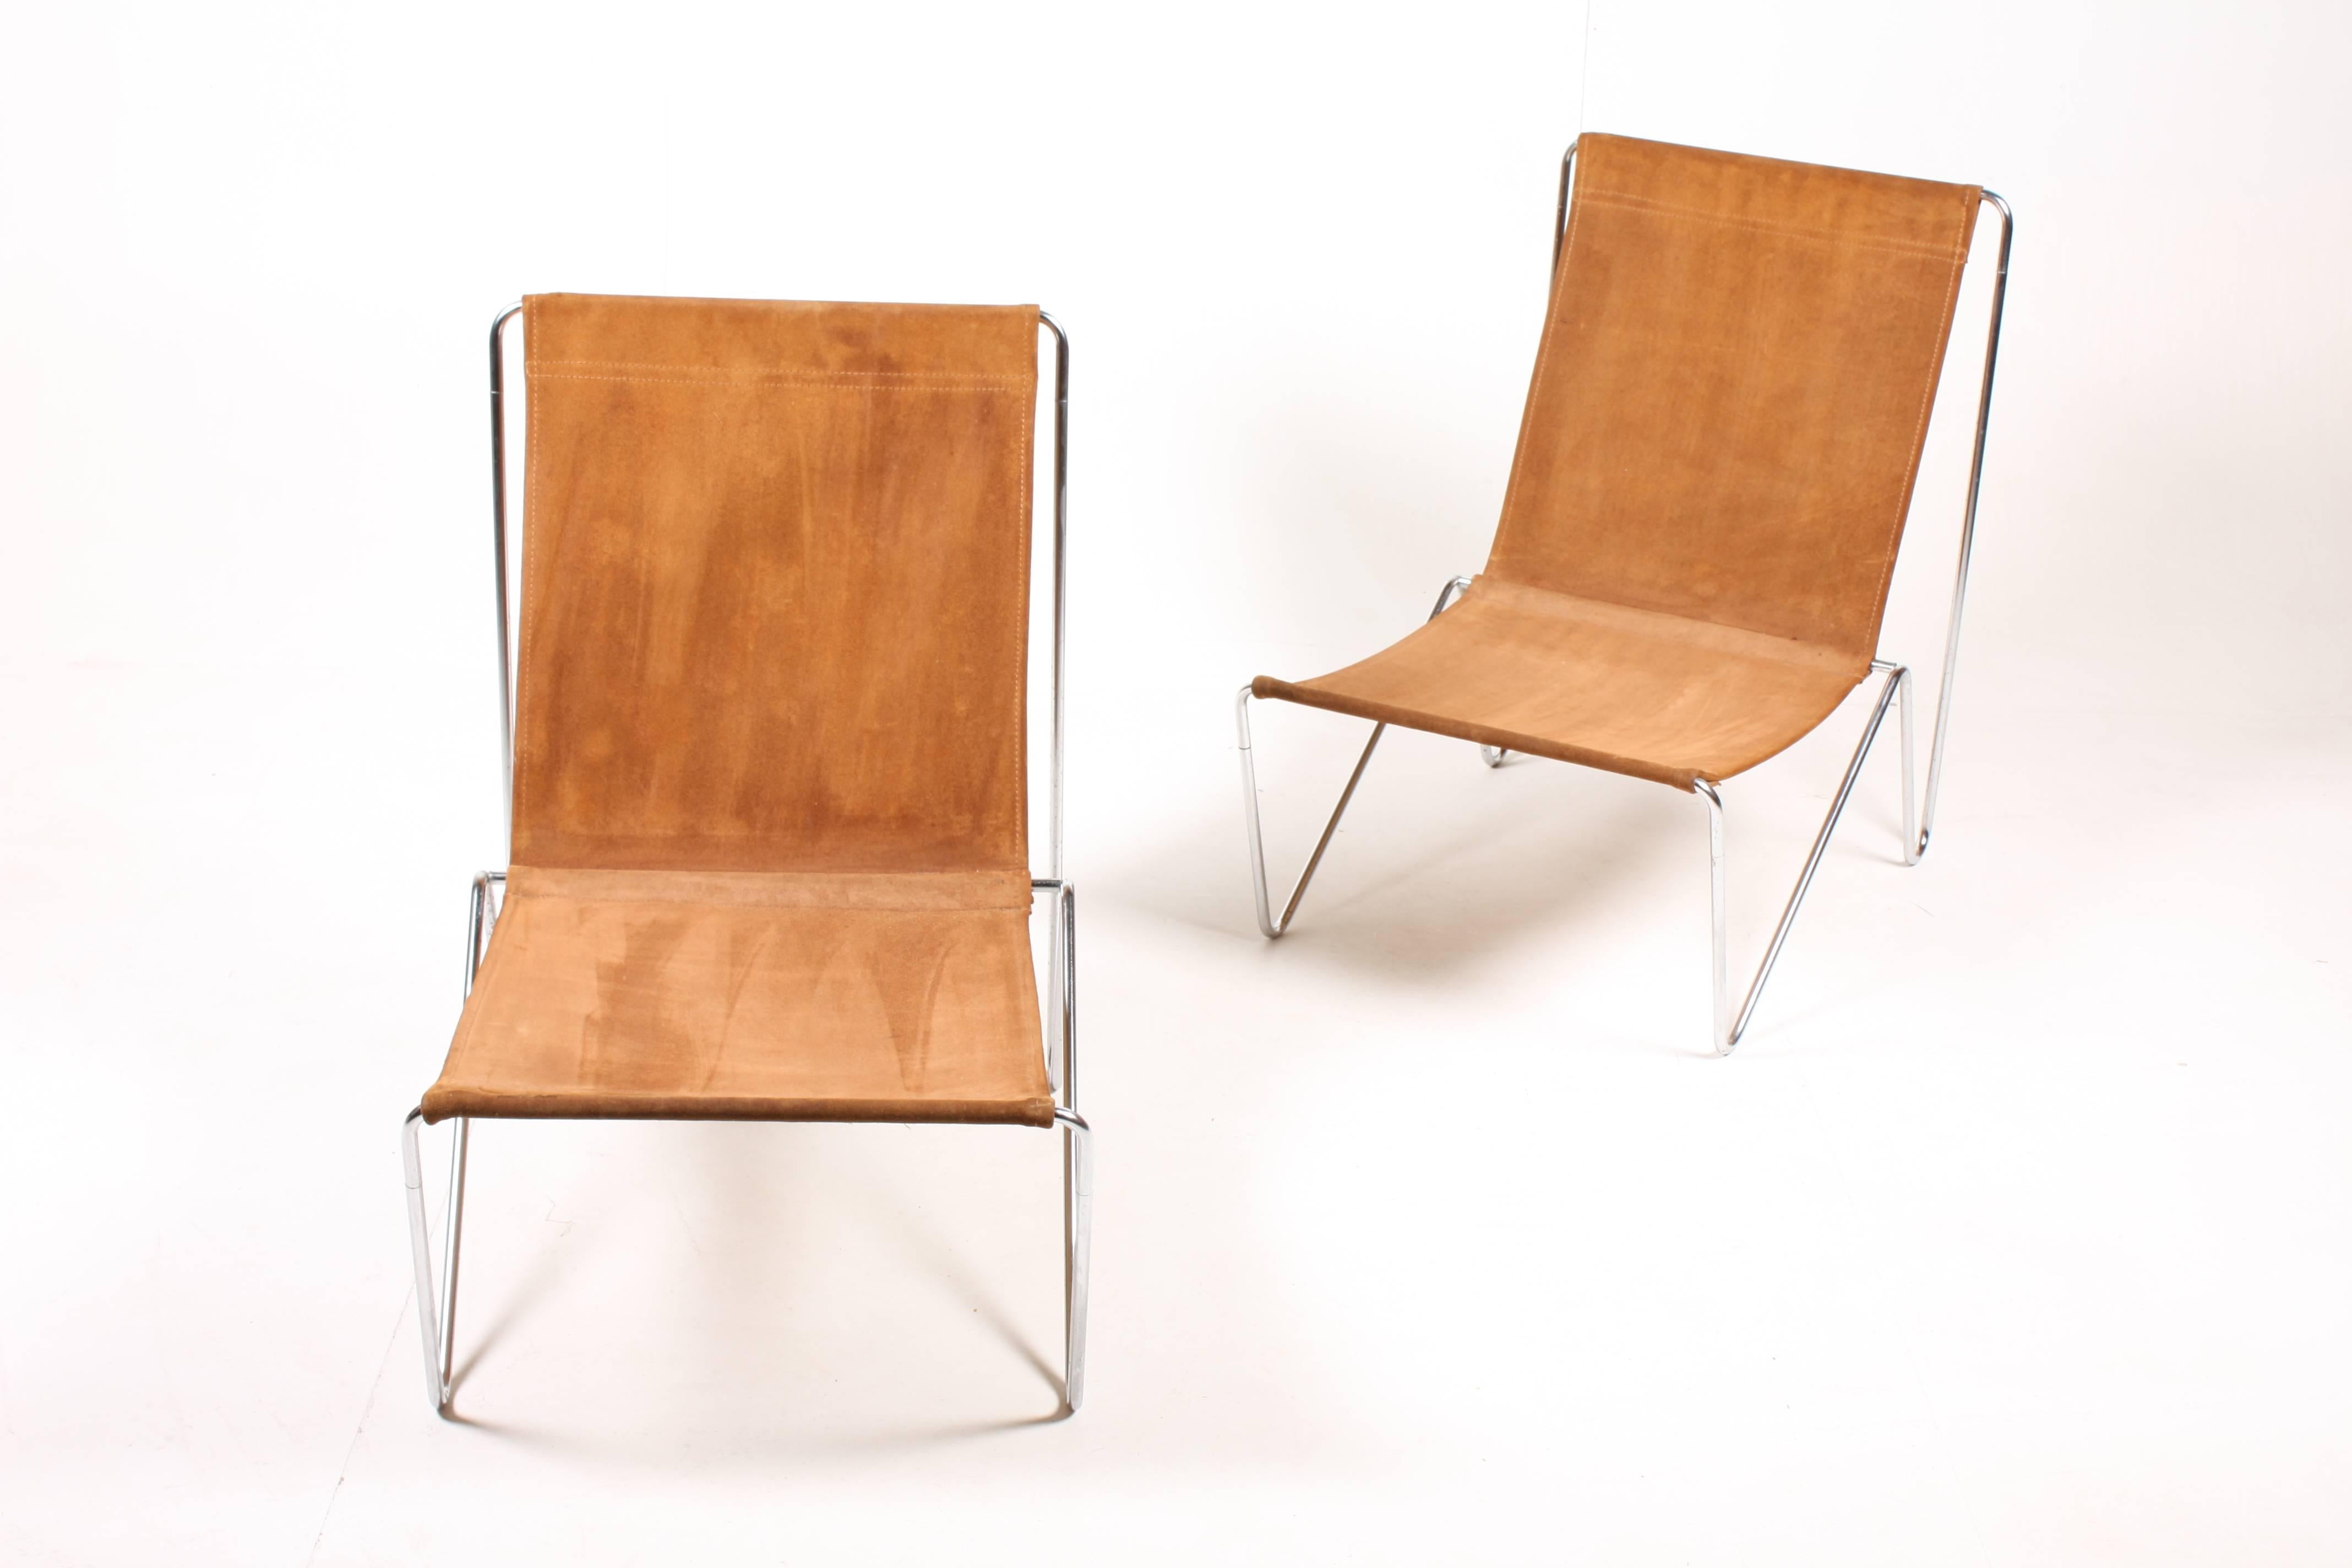 Mid-20th Century Pair of Original Bachelor Chairs by Verner Panton